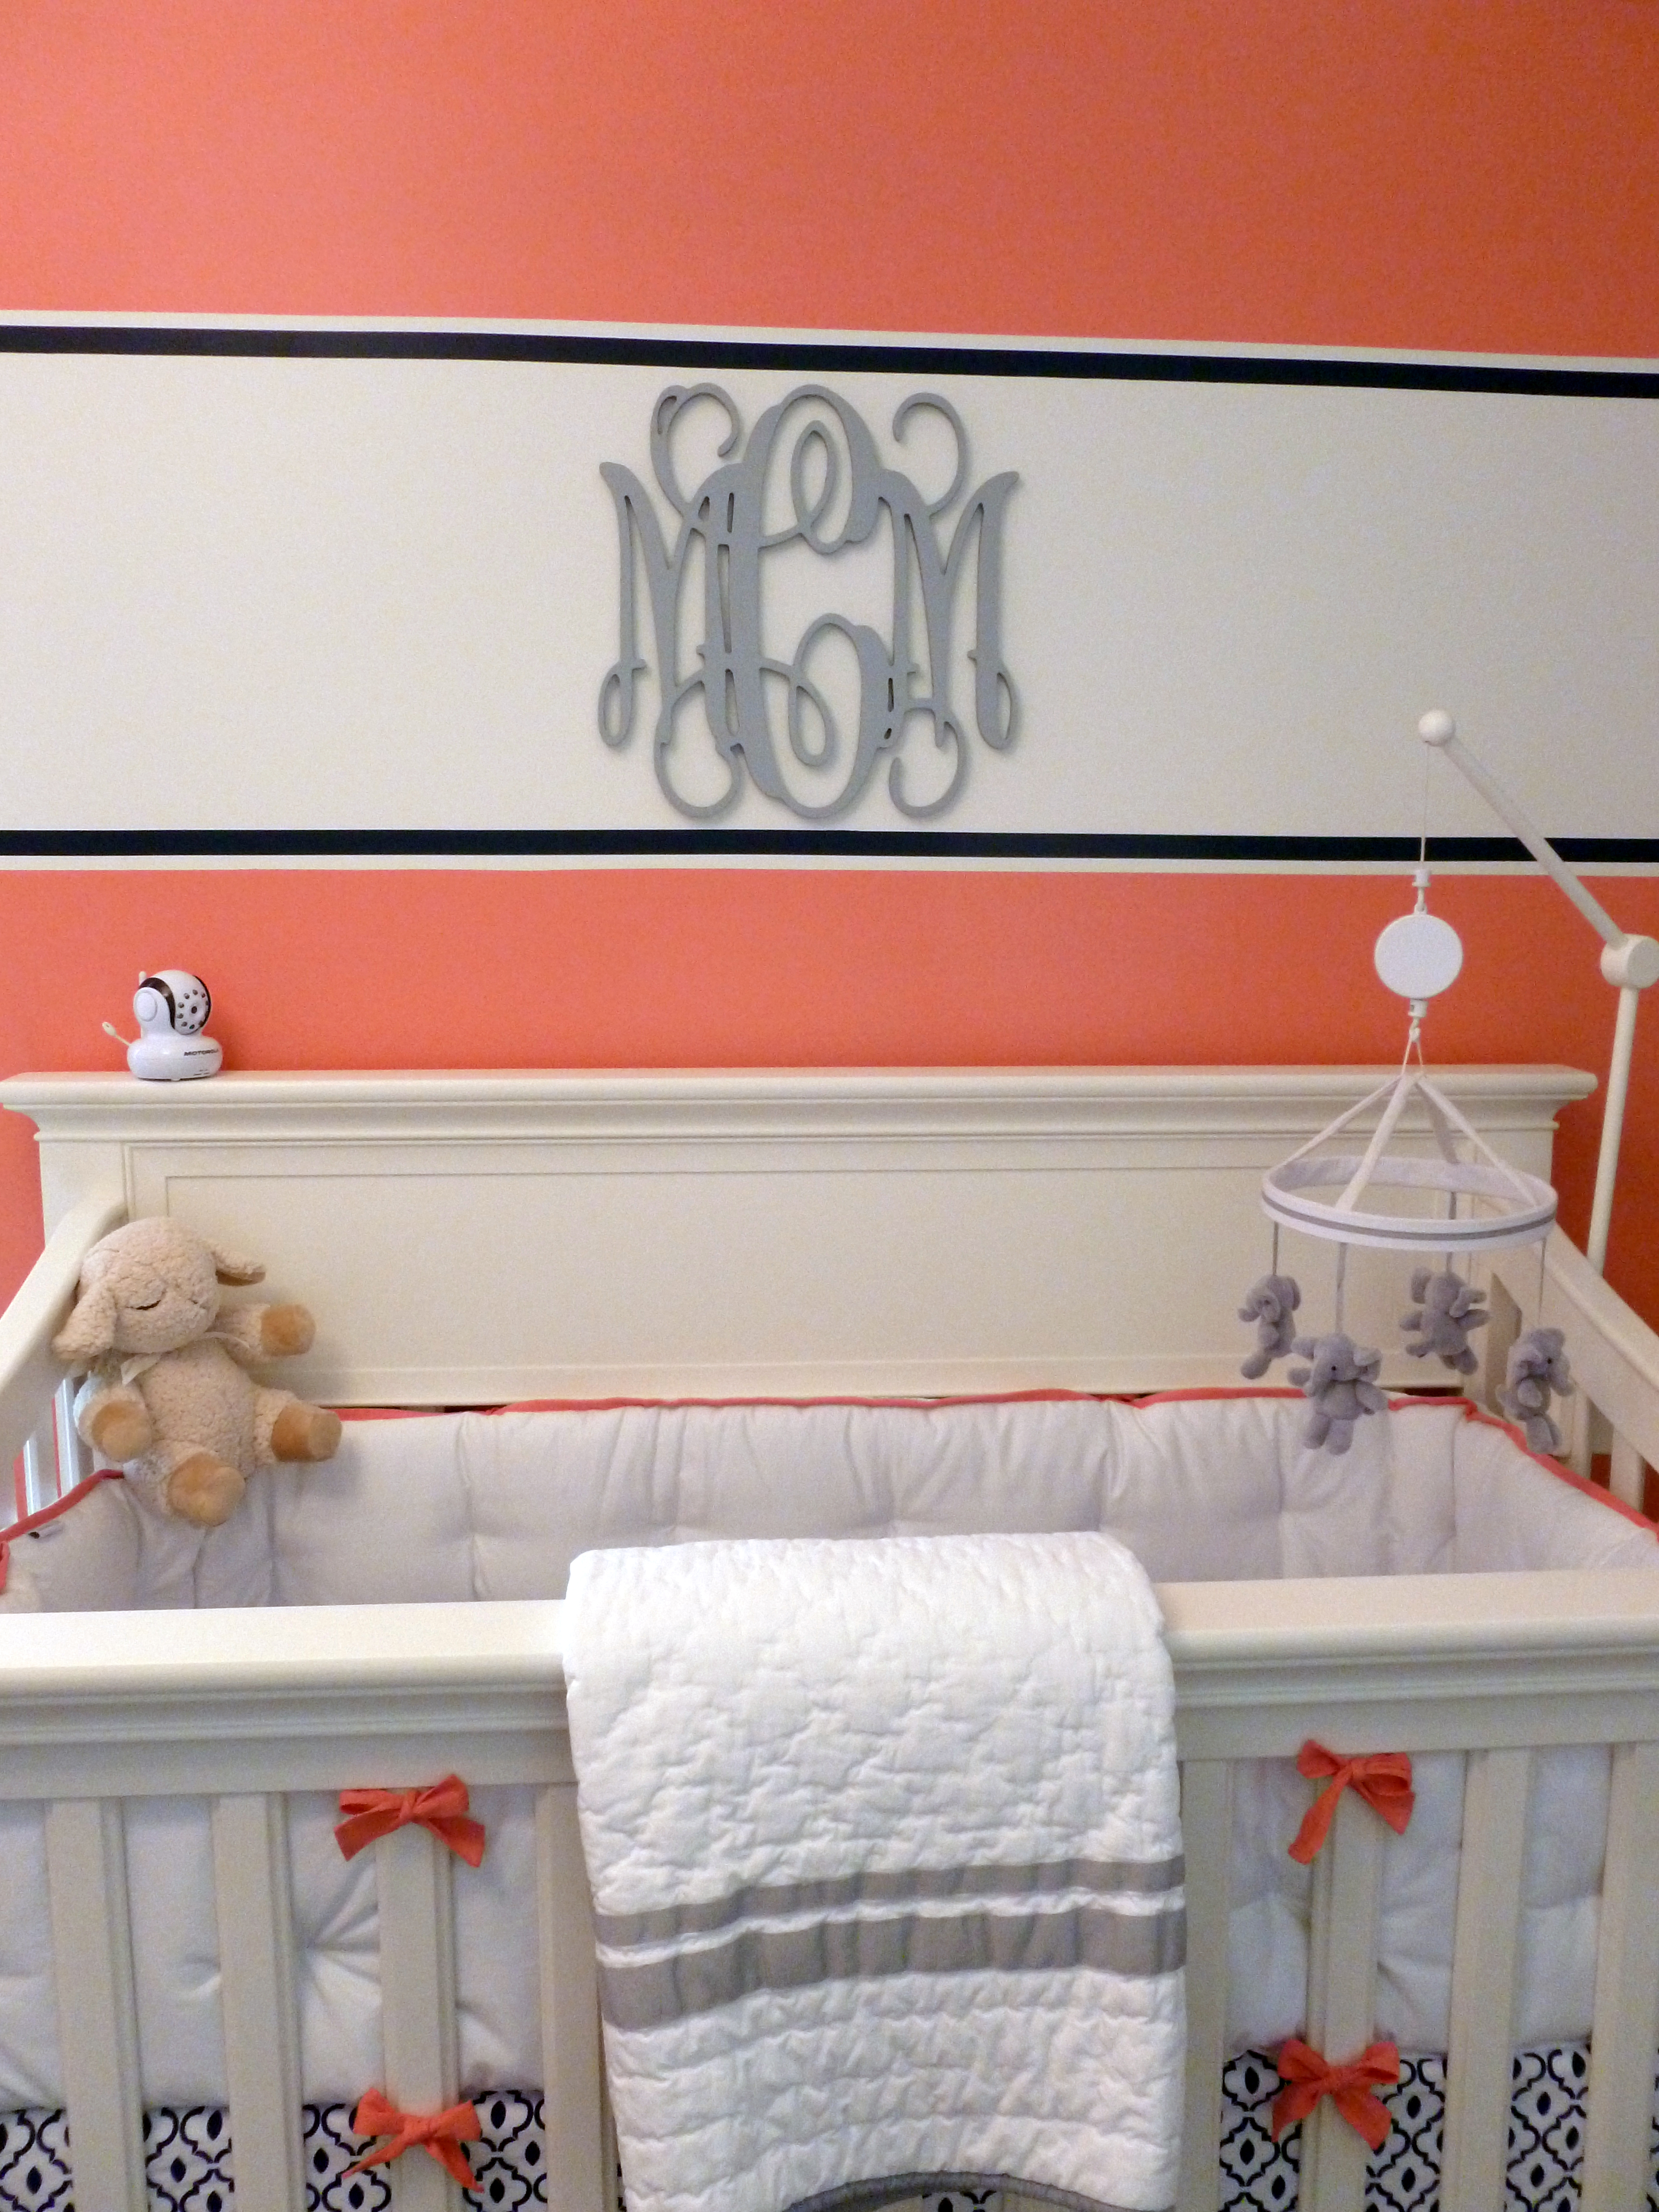 Paint Band Accent Striped Wall with Monogram Over Crib